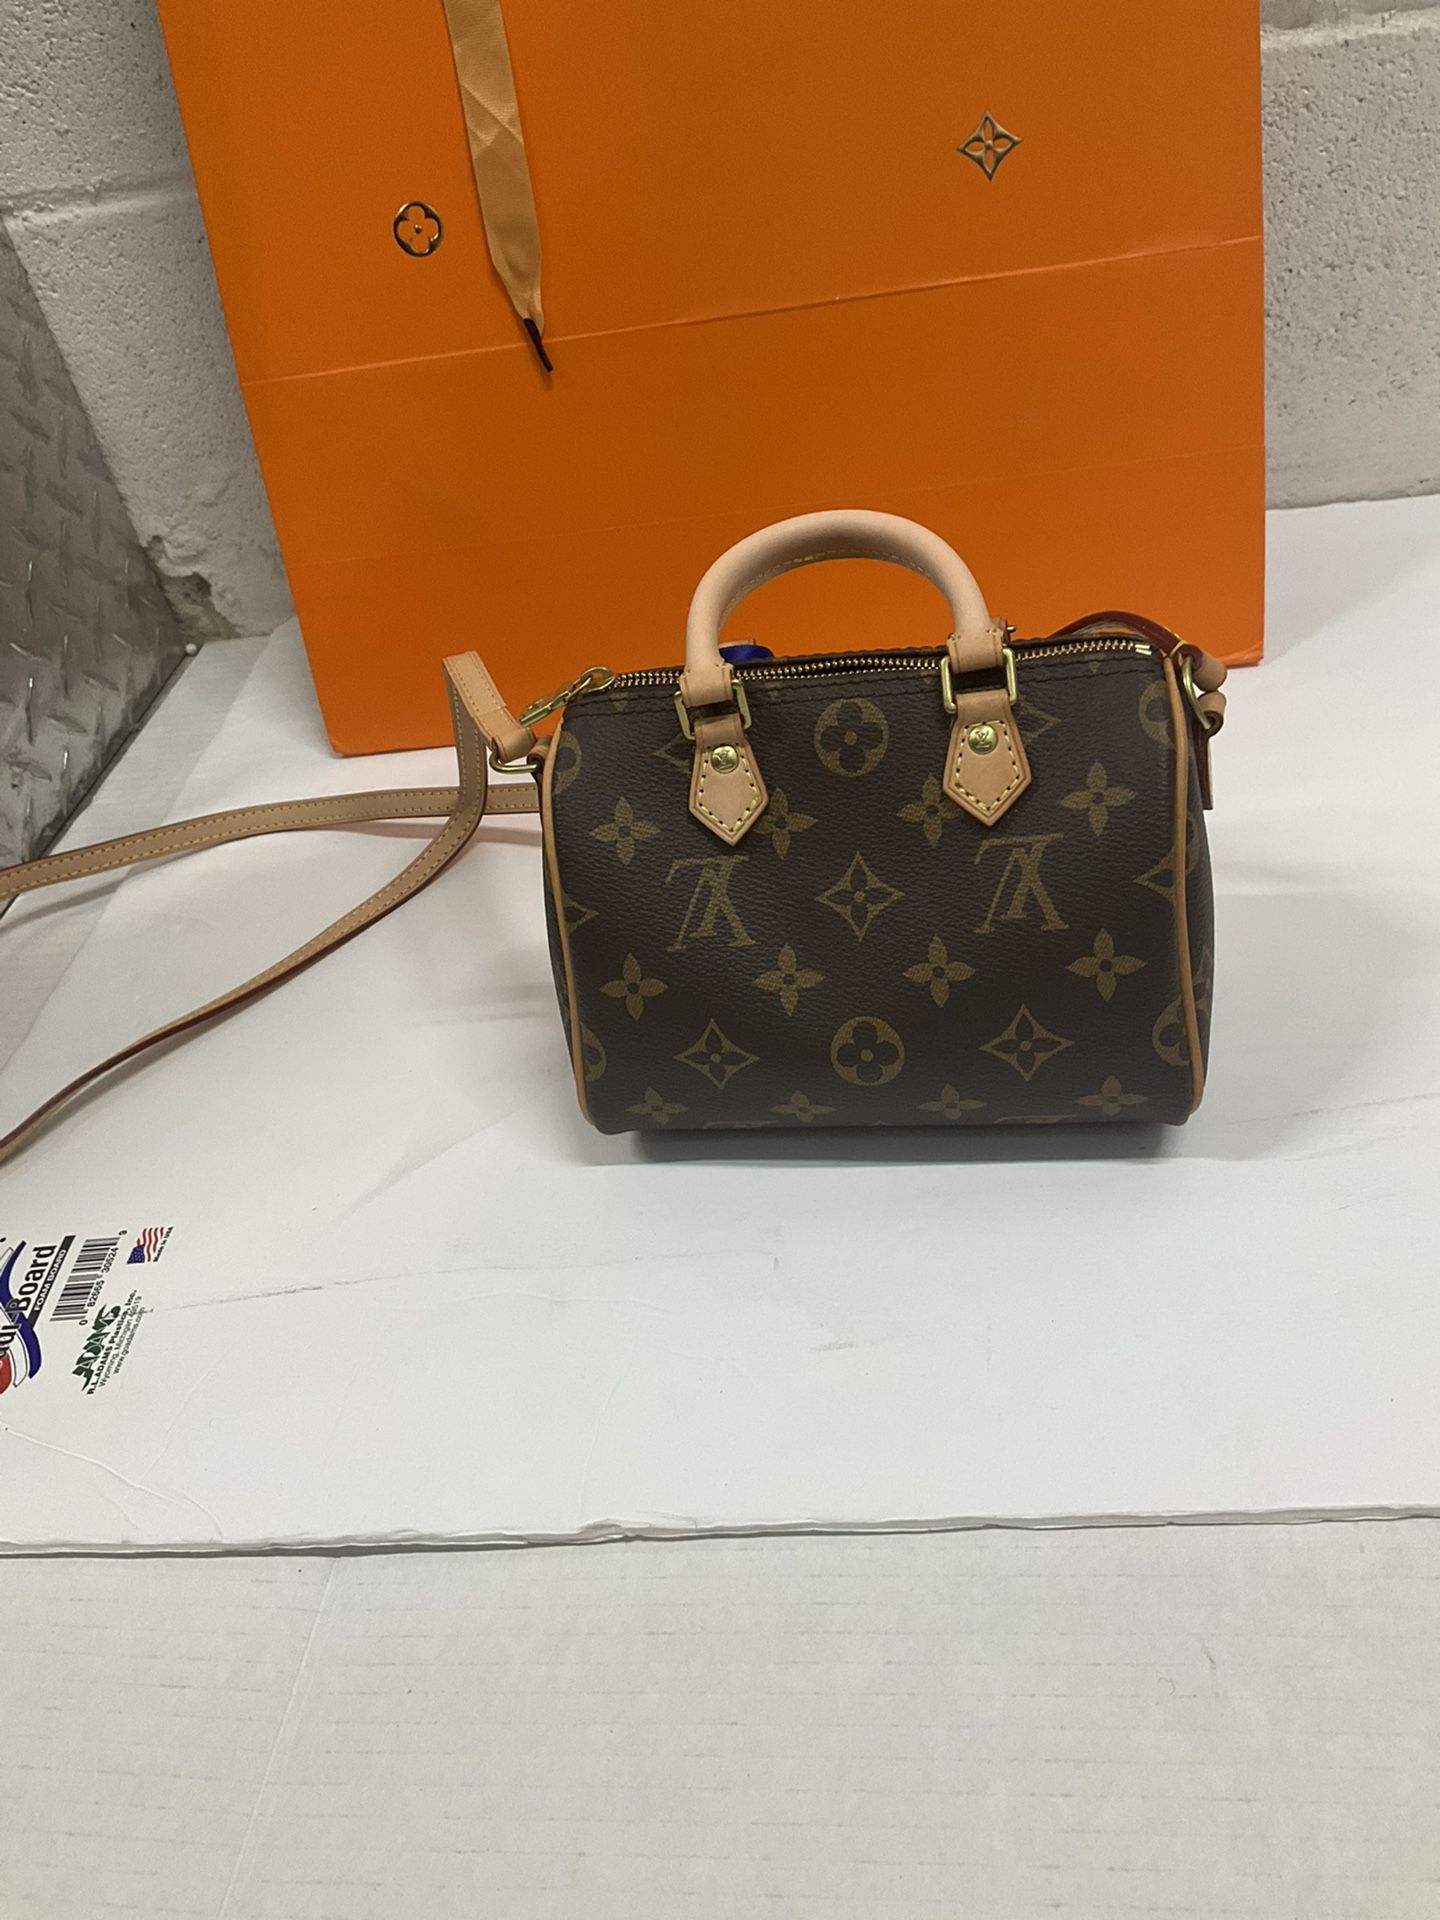 Louis Vuitton Twist One Handle MM Bags for Sale in Jersey City, NJ - OfferUp